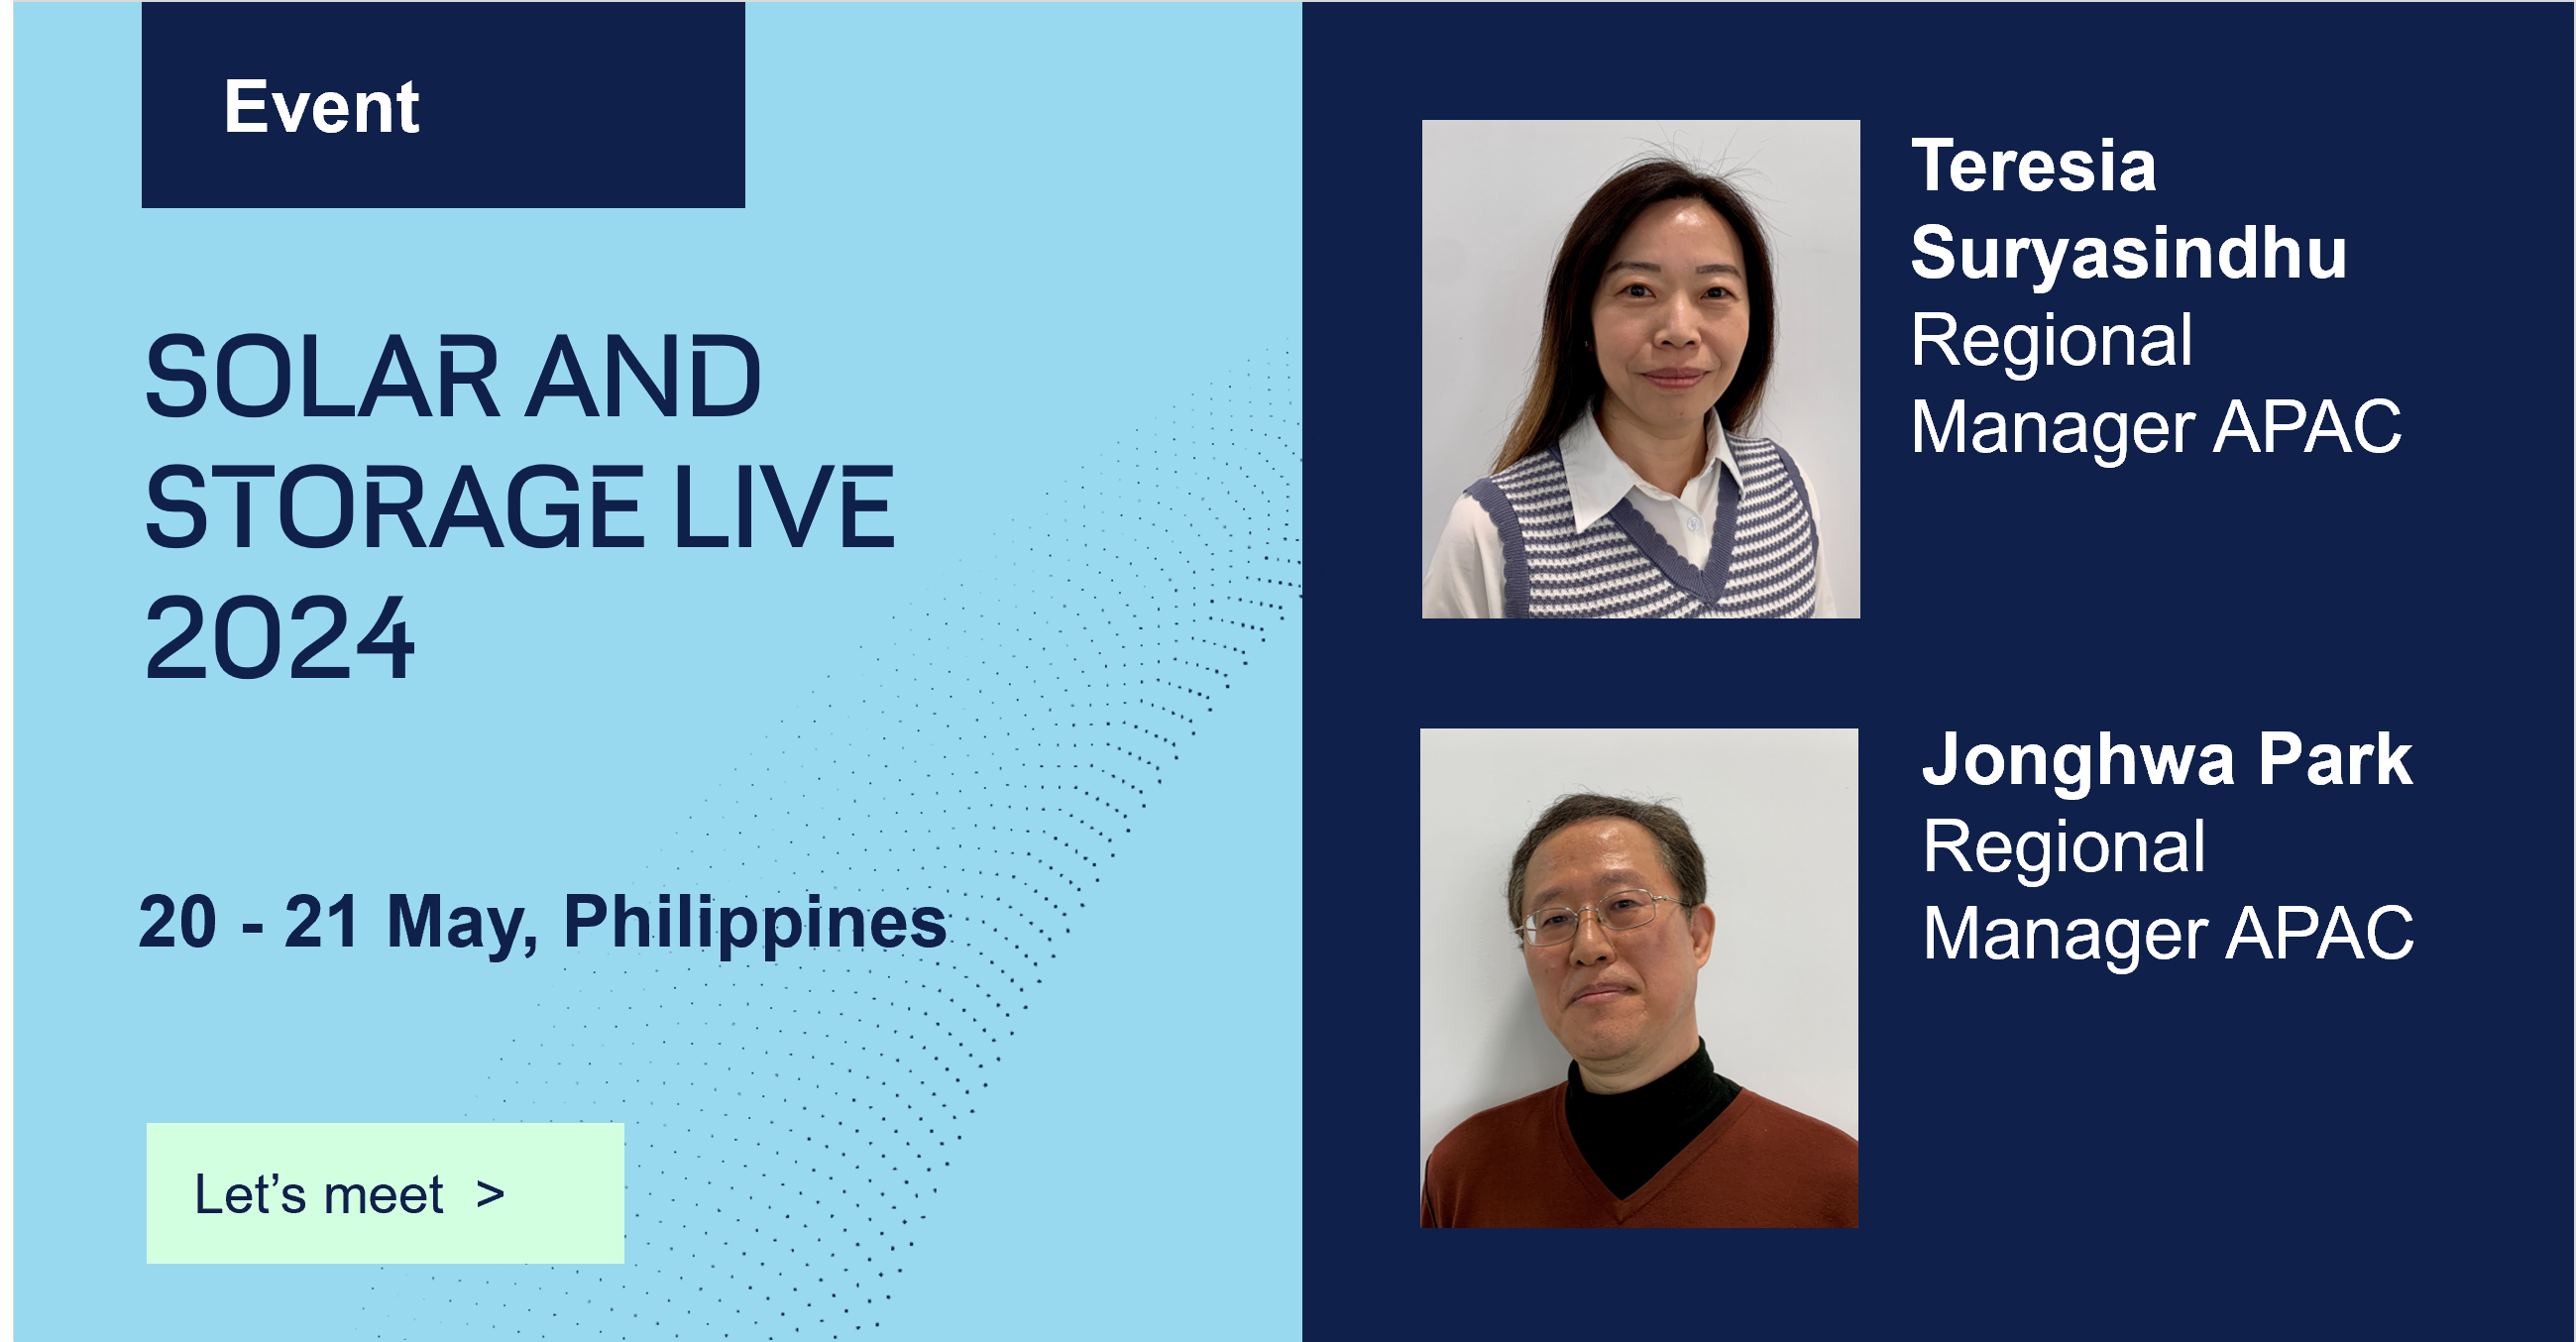 GreenPowerMonitor to attend Solar and Storage LIVE 2024 in Philippines.